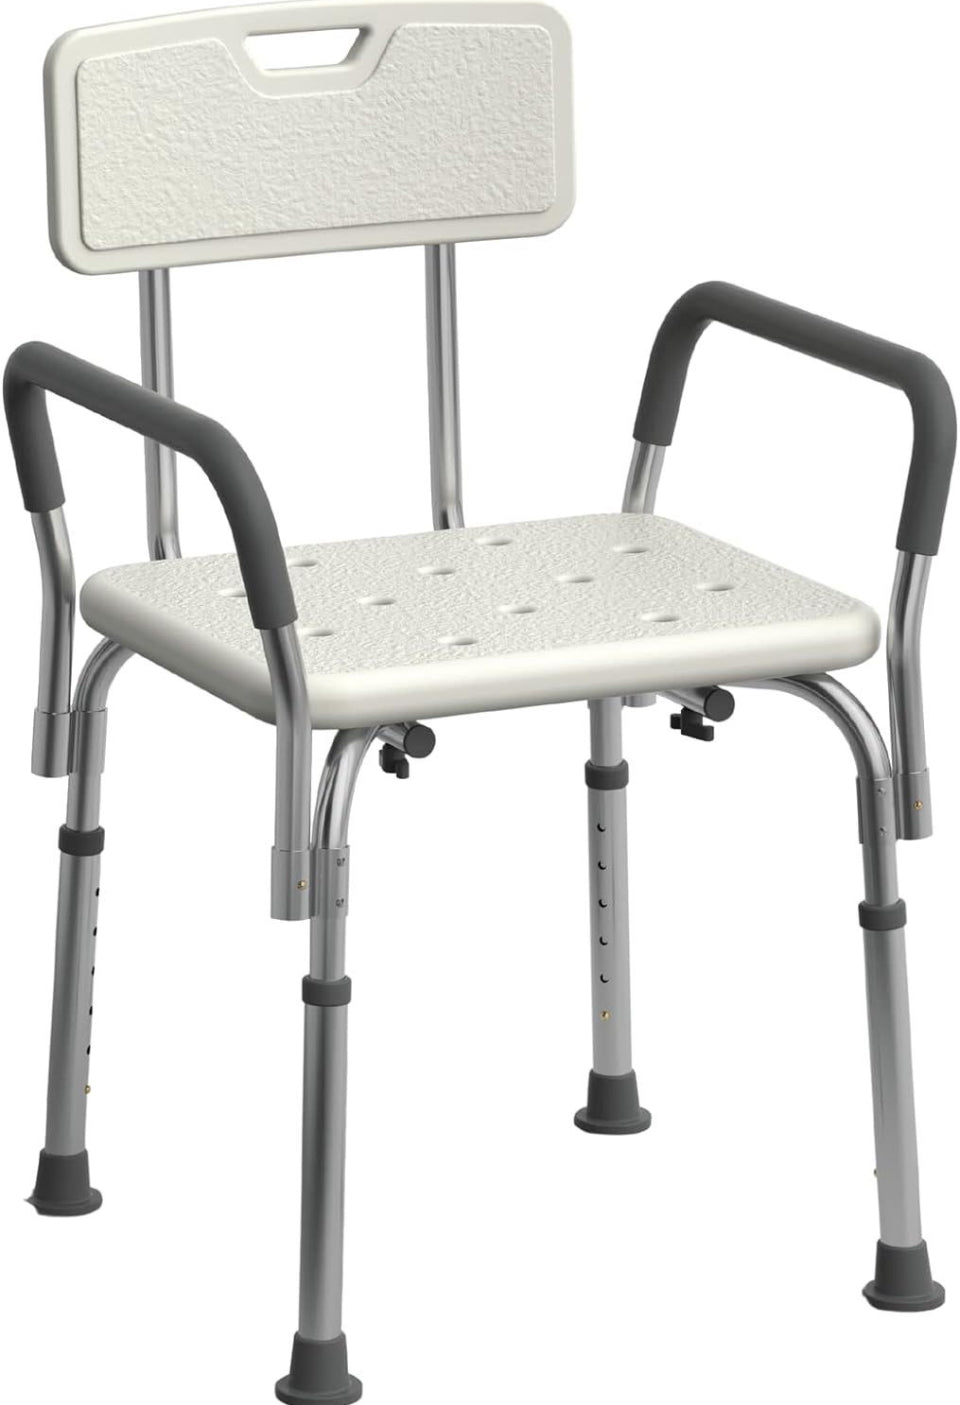 Medline Shower Chair Seat with Padded Armrests and Back Heavy Duty Shower Chair for Bathtub Slip Resistant Shower Seat with Adjustable Height Shower - Selzalot